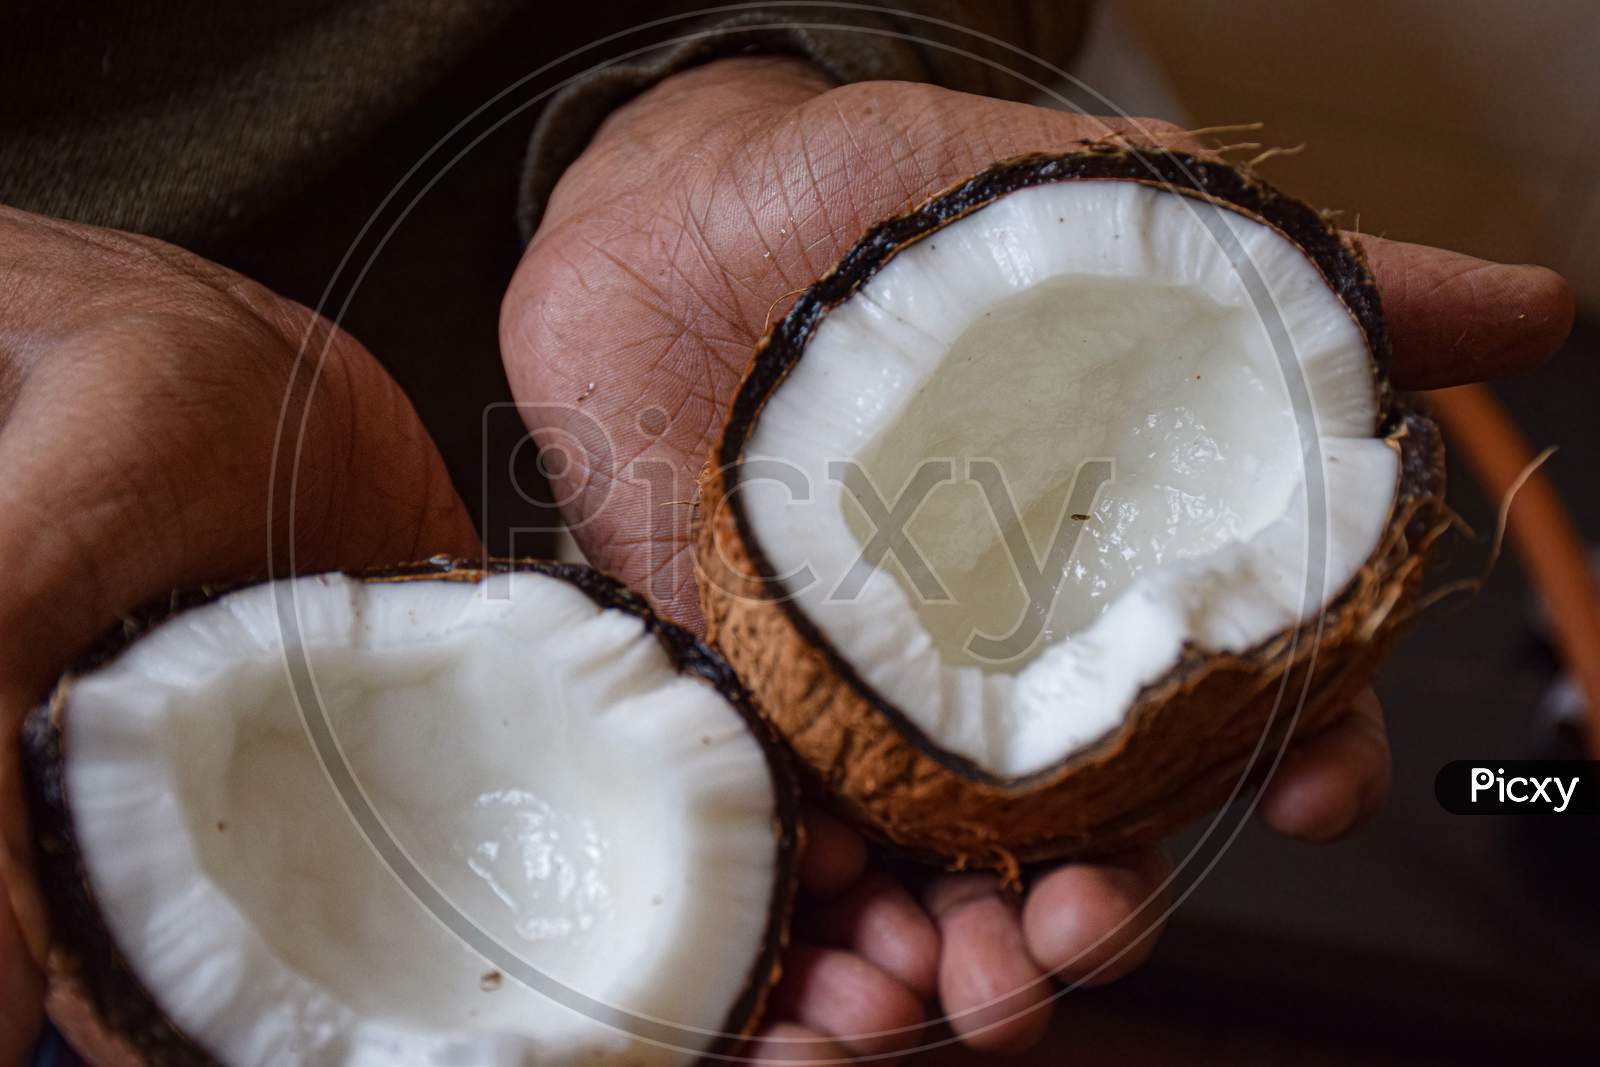 Picture Of Man Holding A Ripe Broken Coconut.